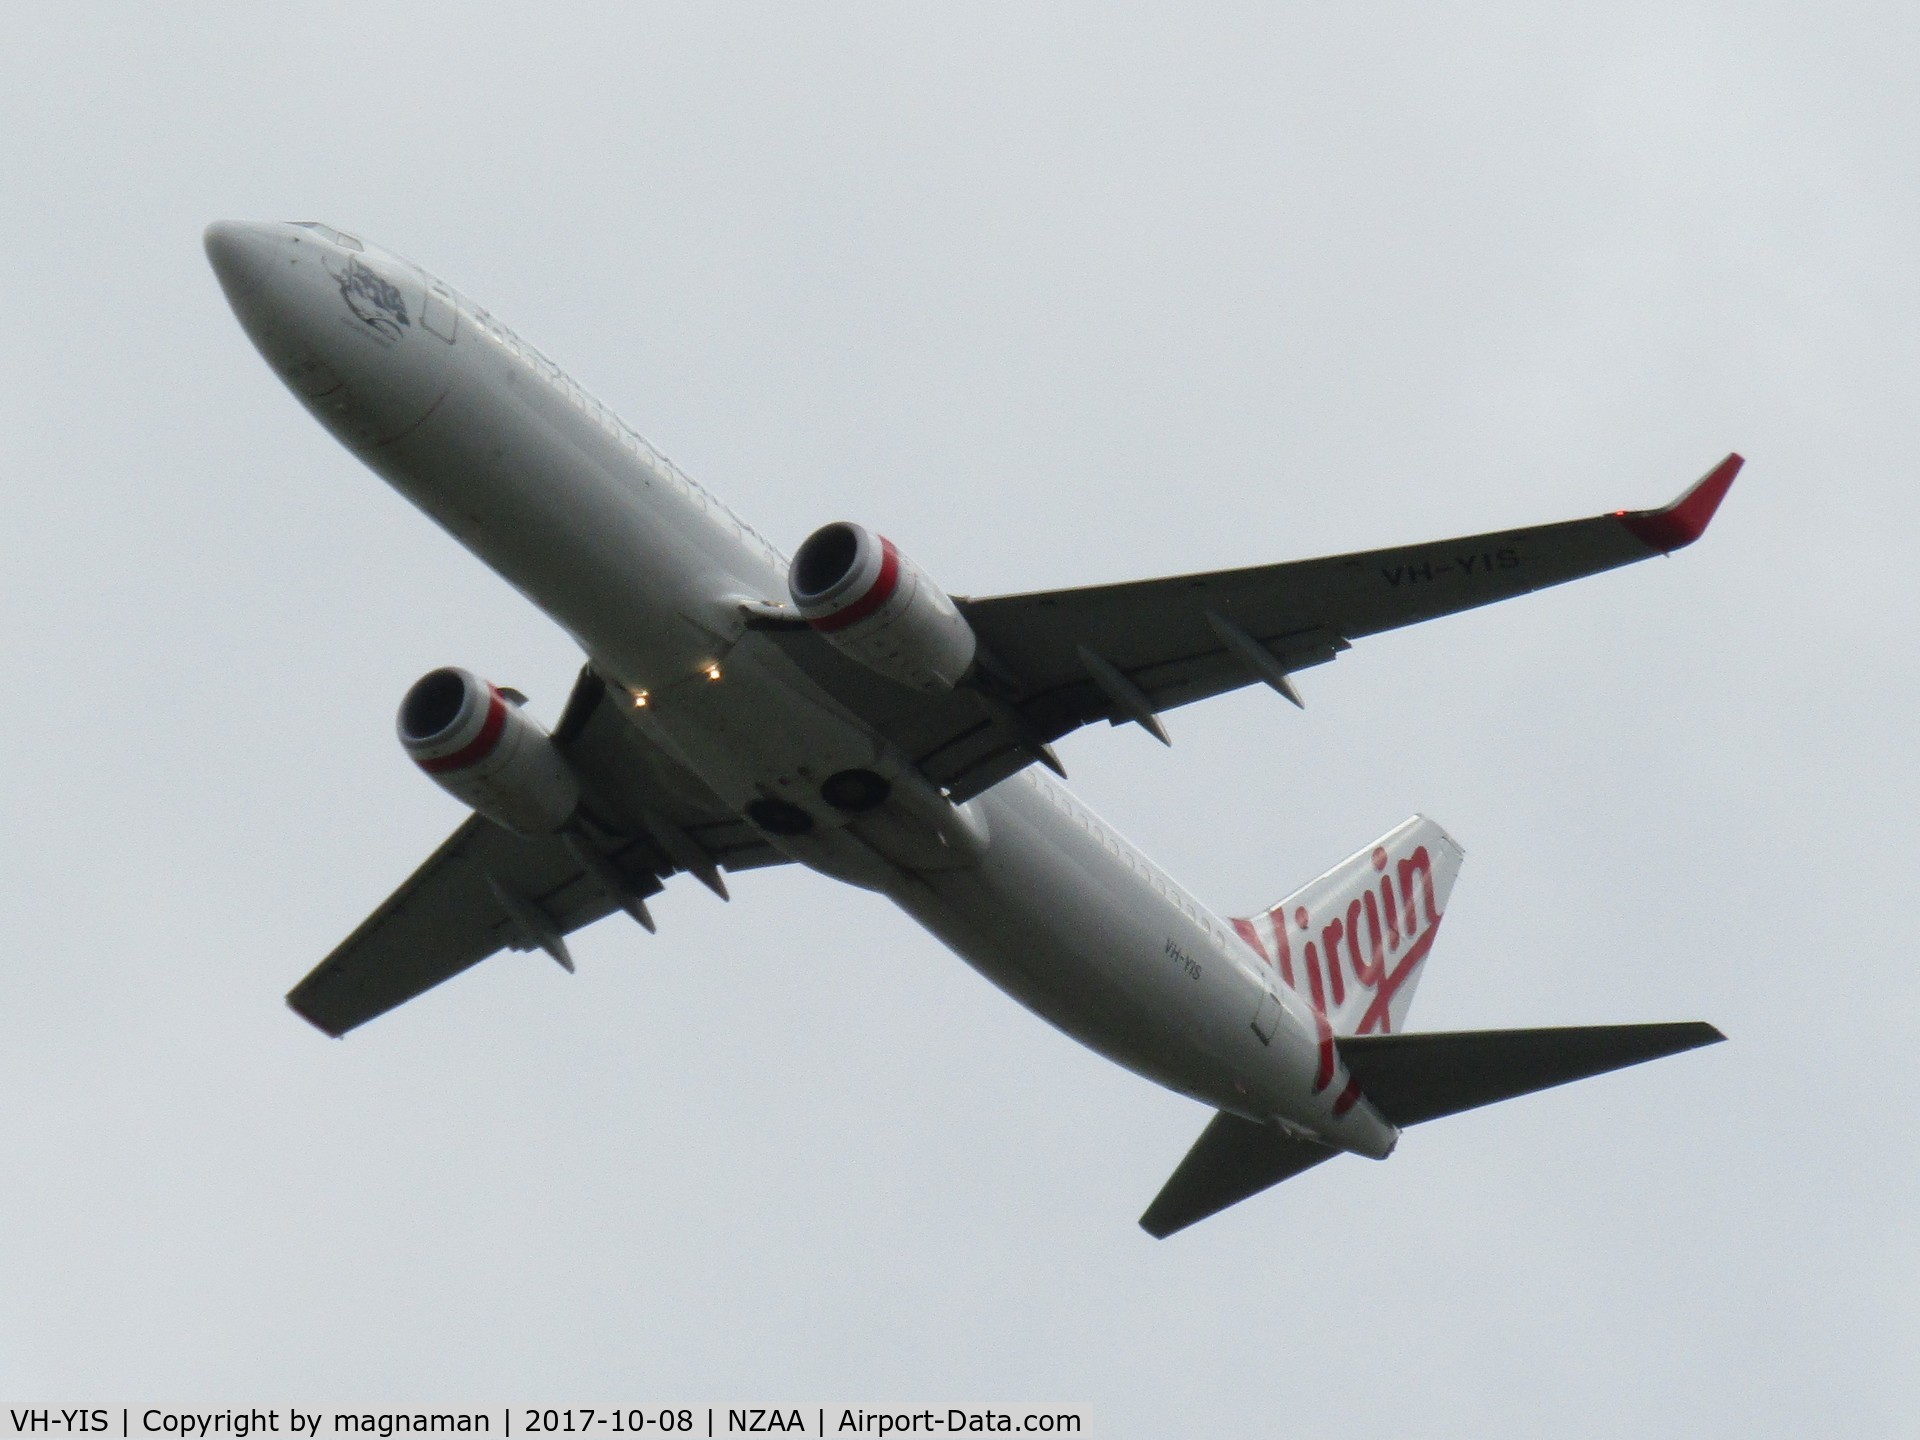 VH-YIS, 2012 Boeing 737-8FE C/N 39926, take off into the gloom